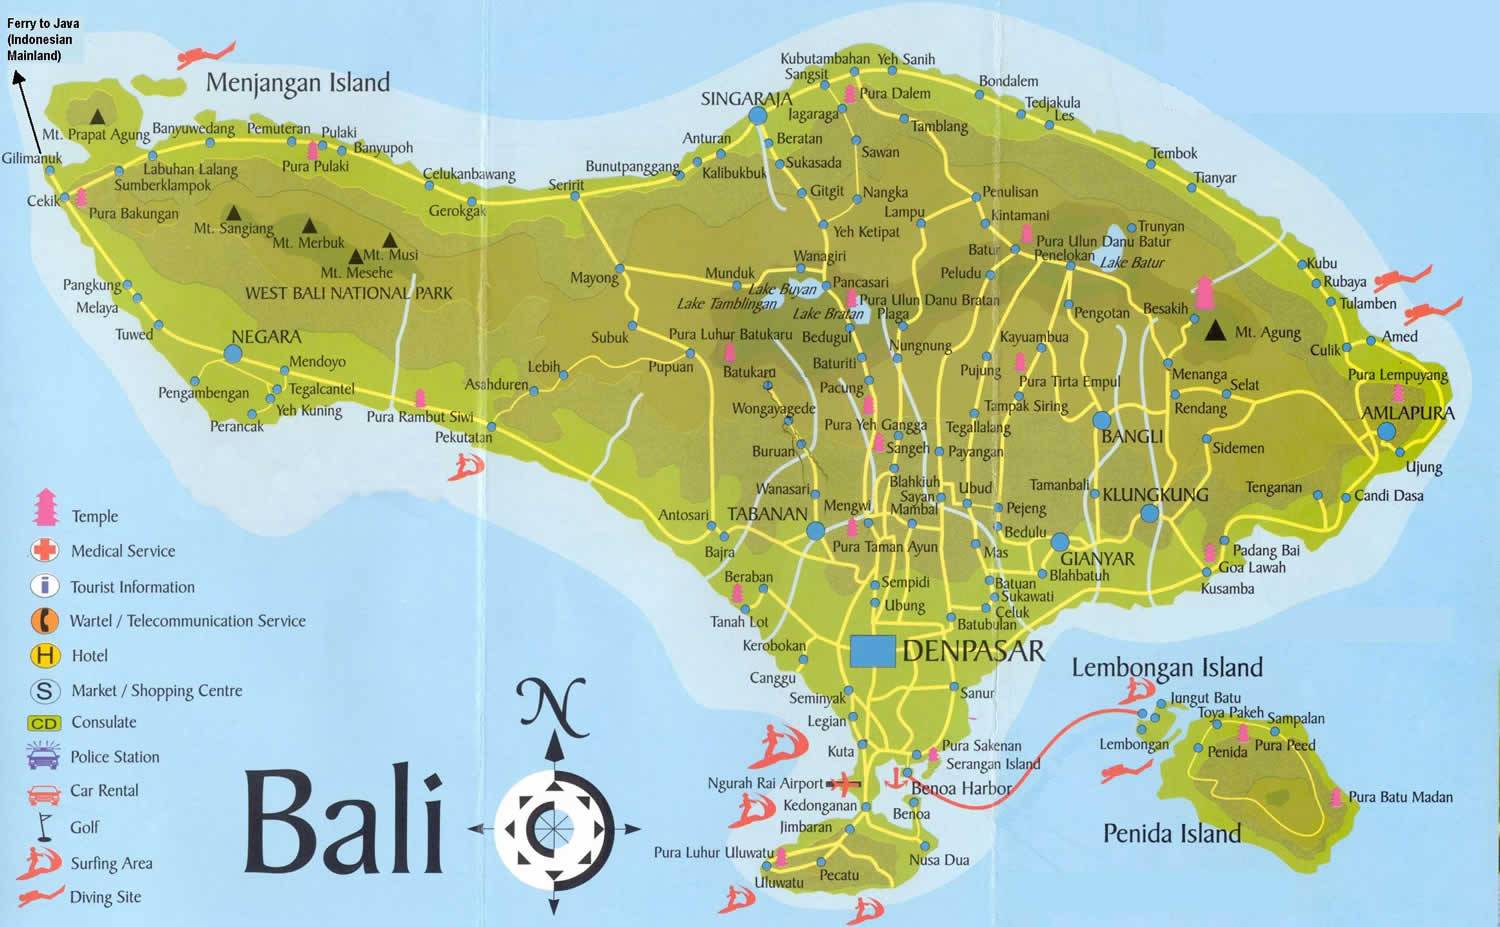 High resolution bali map for downloading